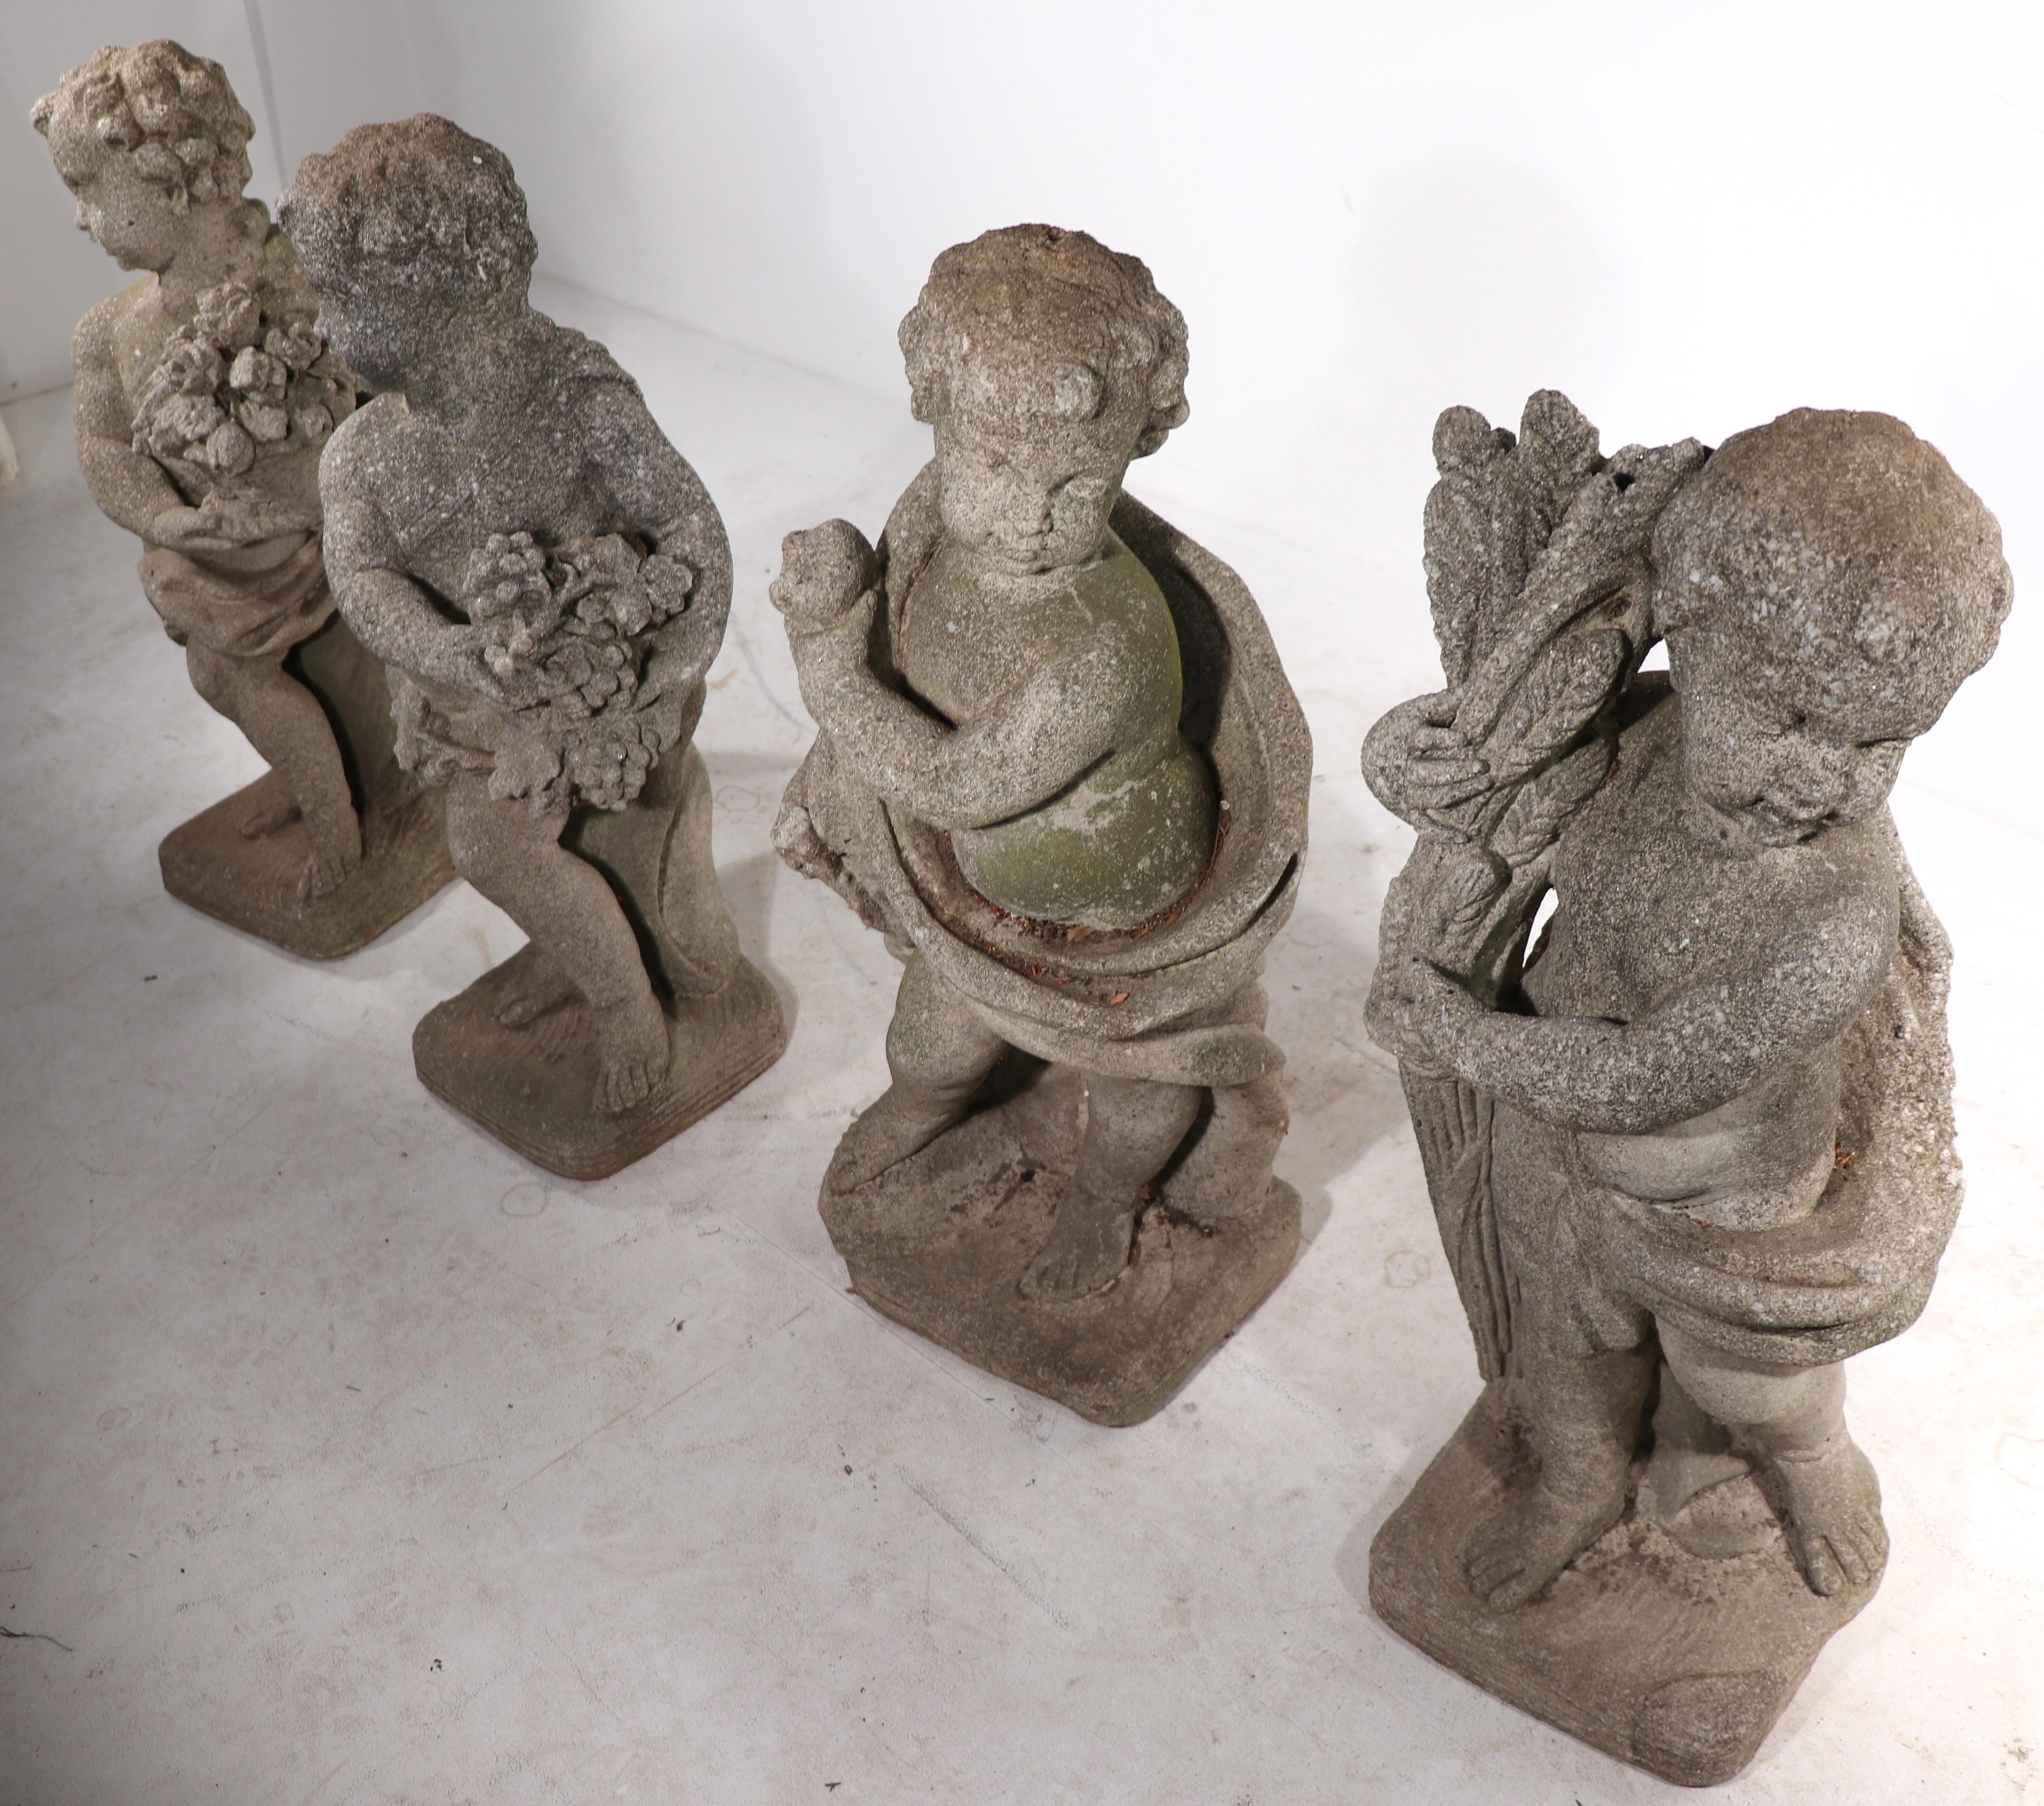 Second payment for Four Seasons Cast Stone Garden Statues 3